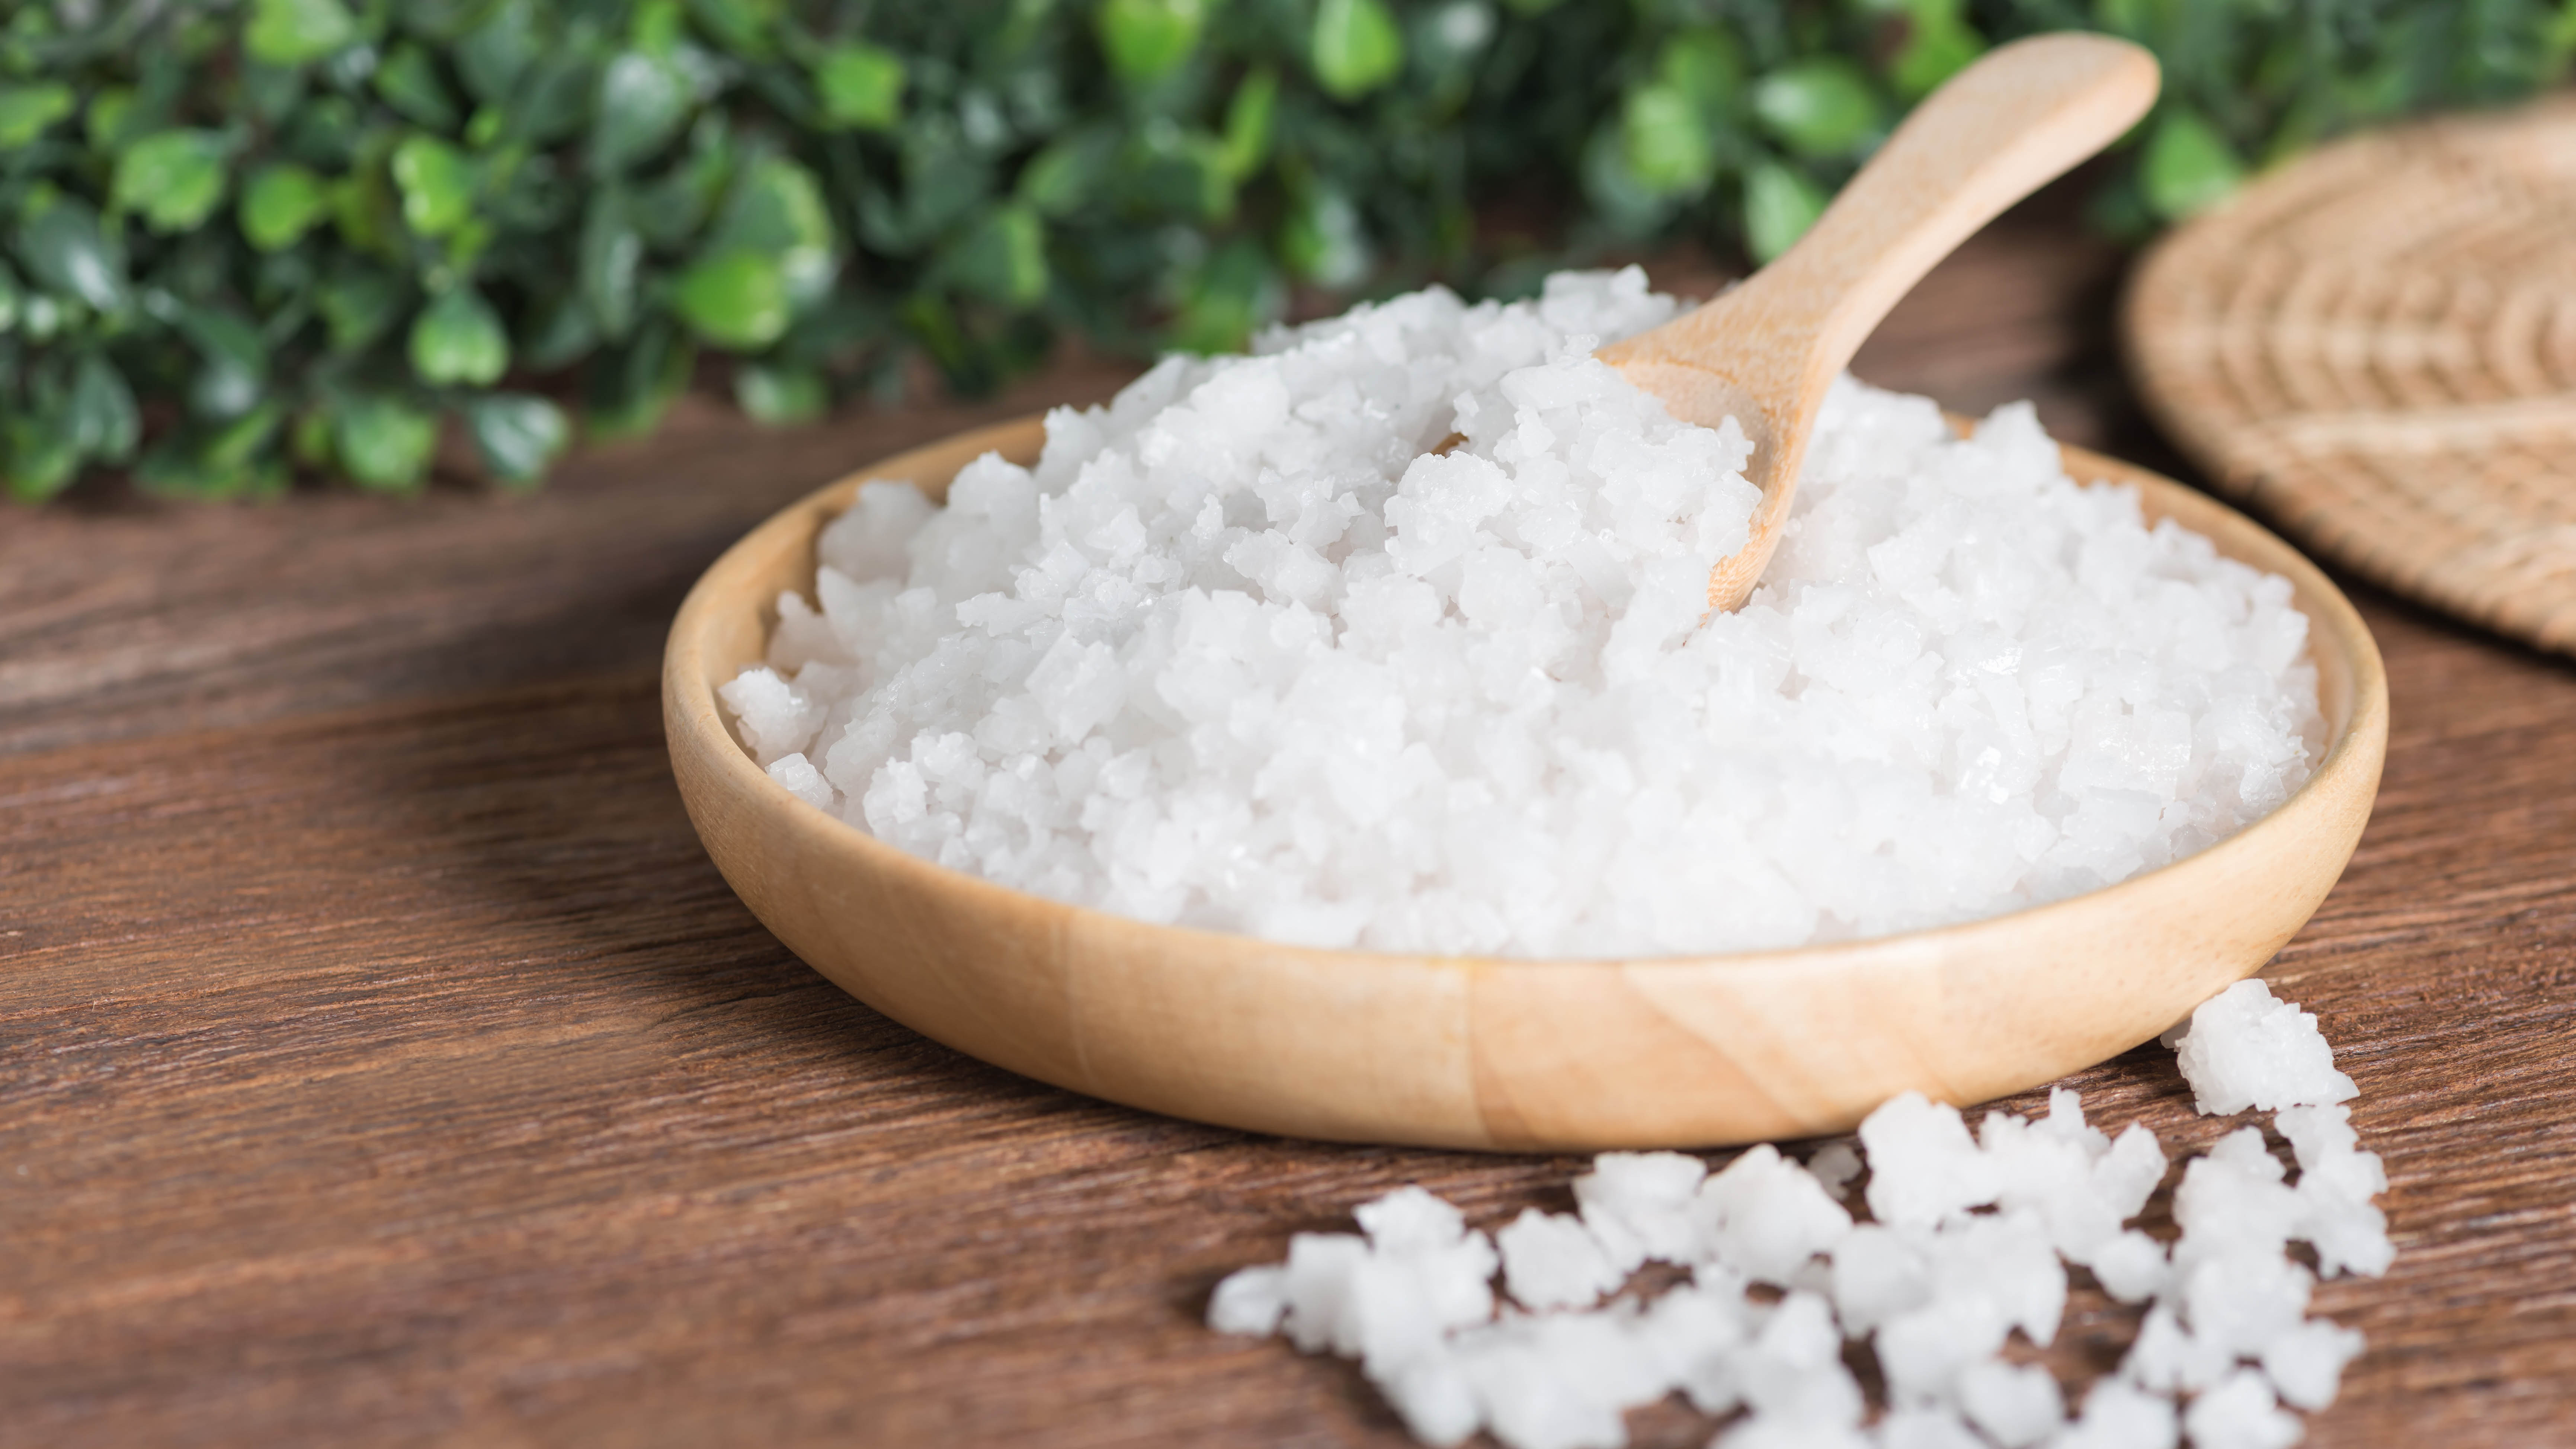 Epsom salts in a wooden bowl